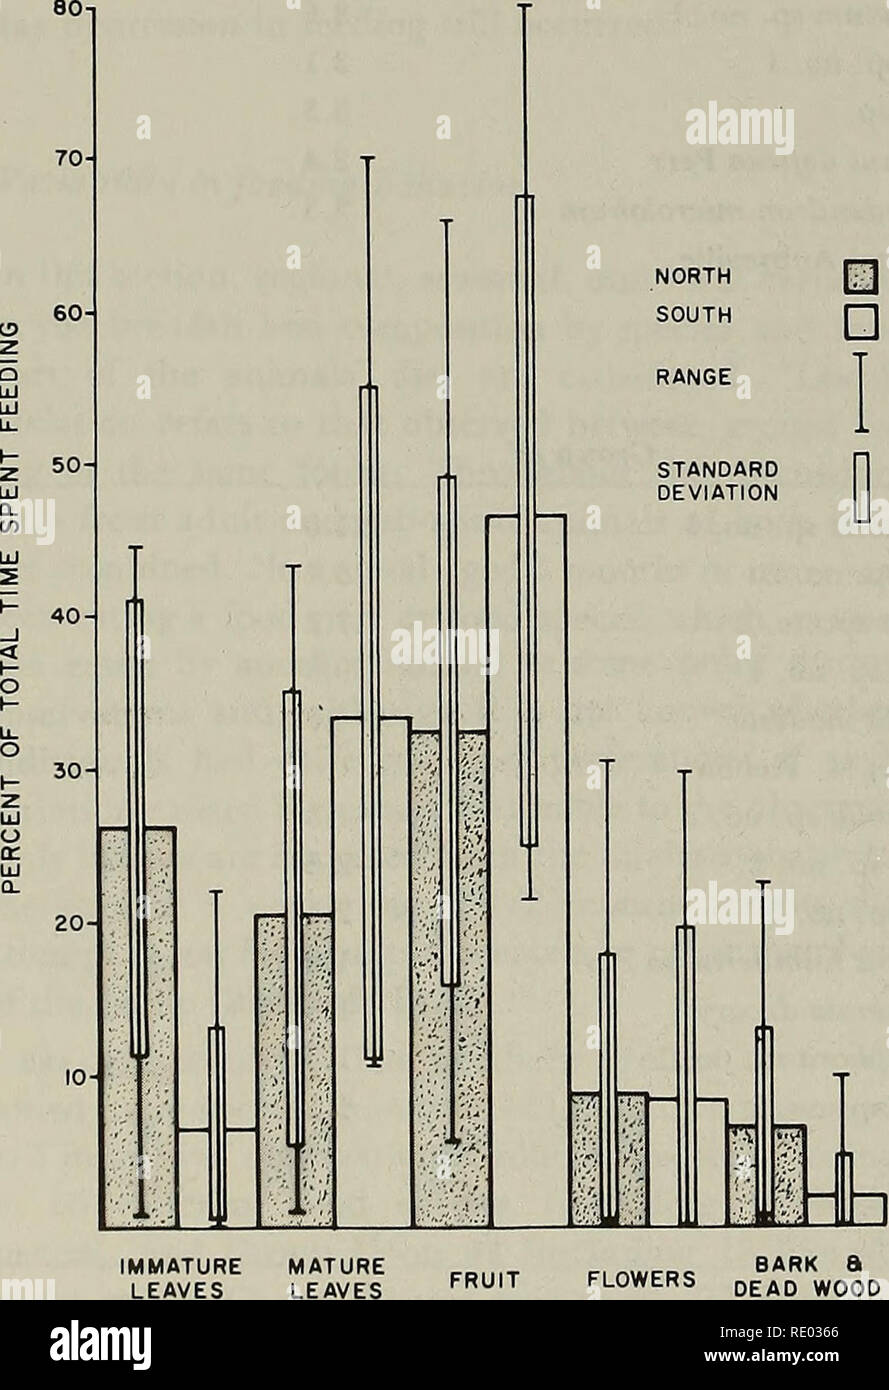 . The Ecology of arboreal folivores : a symposium held at the Conservation and Research Center, National Zoological Park, Smithsonian Institution, May 29-31, 1975. Folivores; Forest ecology; Leaves; Mammals; Mammals. geiformis (found in 92 percent of vegetation samples in the north and 23 percent in the south) was an important dietary component in the north but un- touched in the south. Cedrelopsis grevei (17 percent in the north, and 77 percent in the south) was eaten commonly in the south, but never in the north. Commiphora pervilleana (66 percent in the north, and 77 percent in the south) w Stock Photo